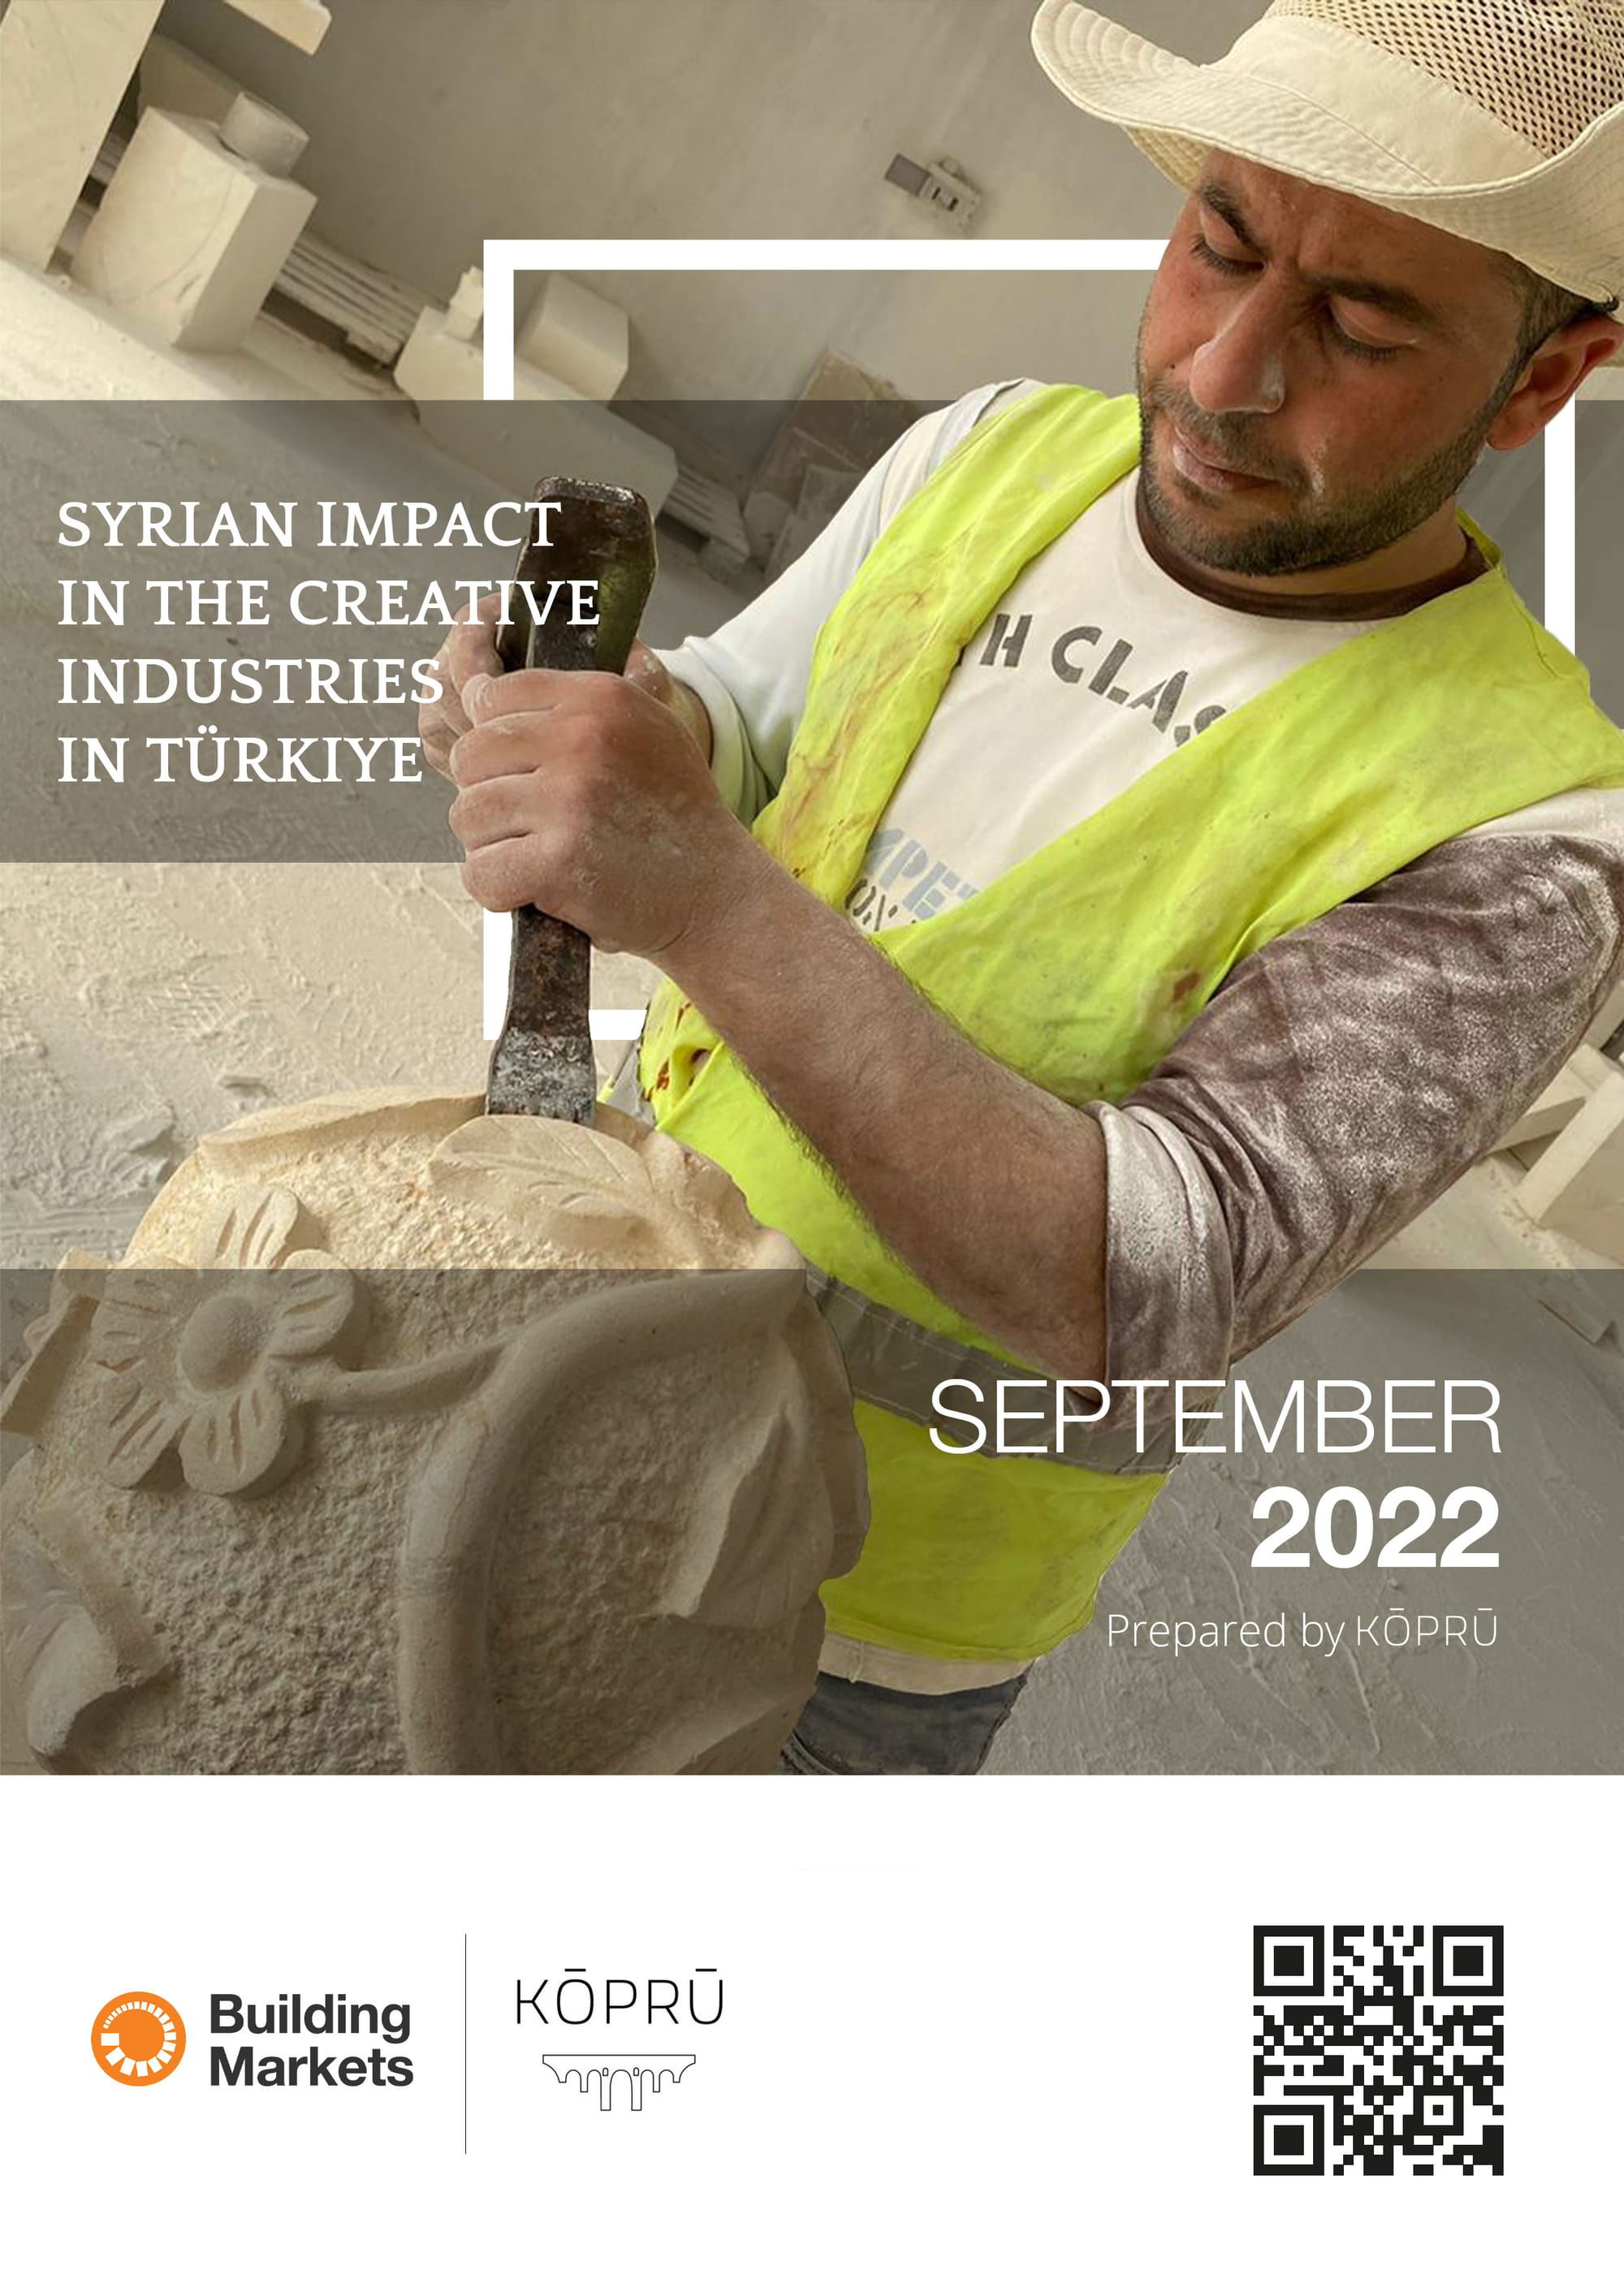 Research on "Syrian Impact in the Creative Industries in Türkiye Launched/ October 2022